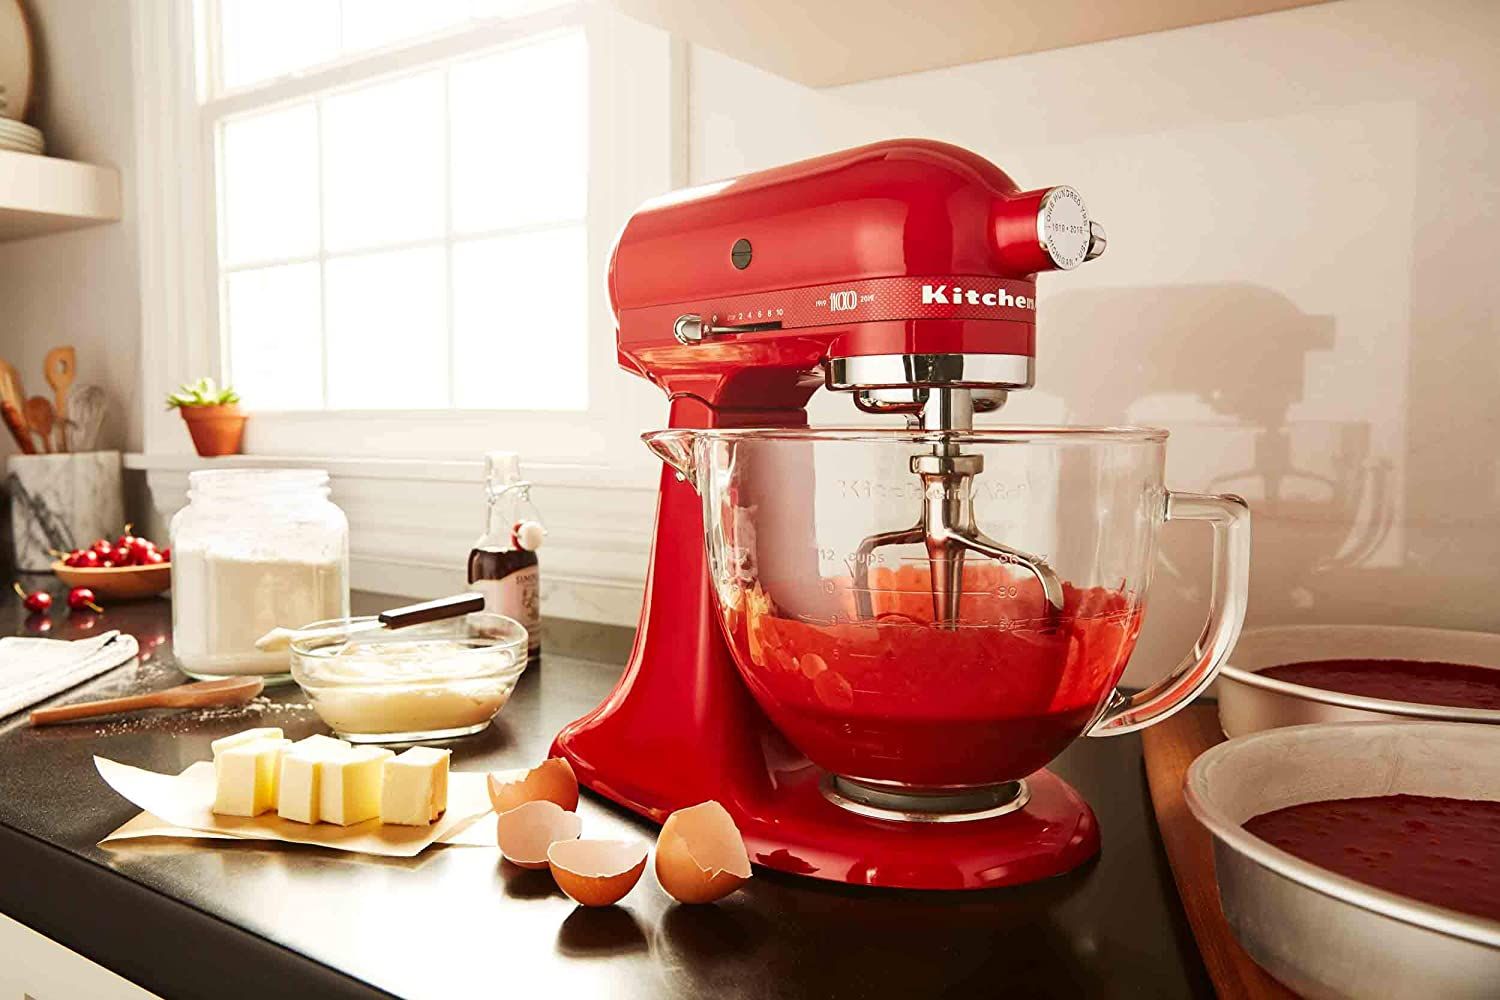 Black Friday 2020: The KitchenAid Professional mixer is at an all